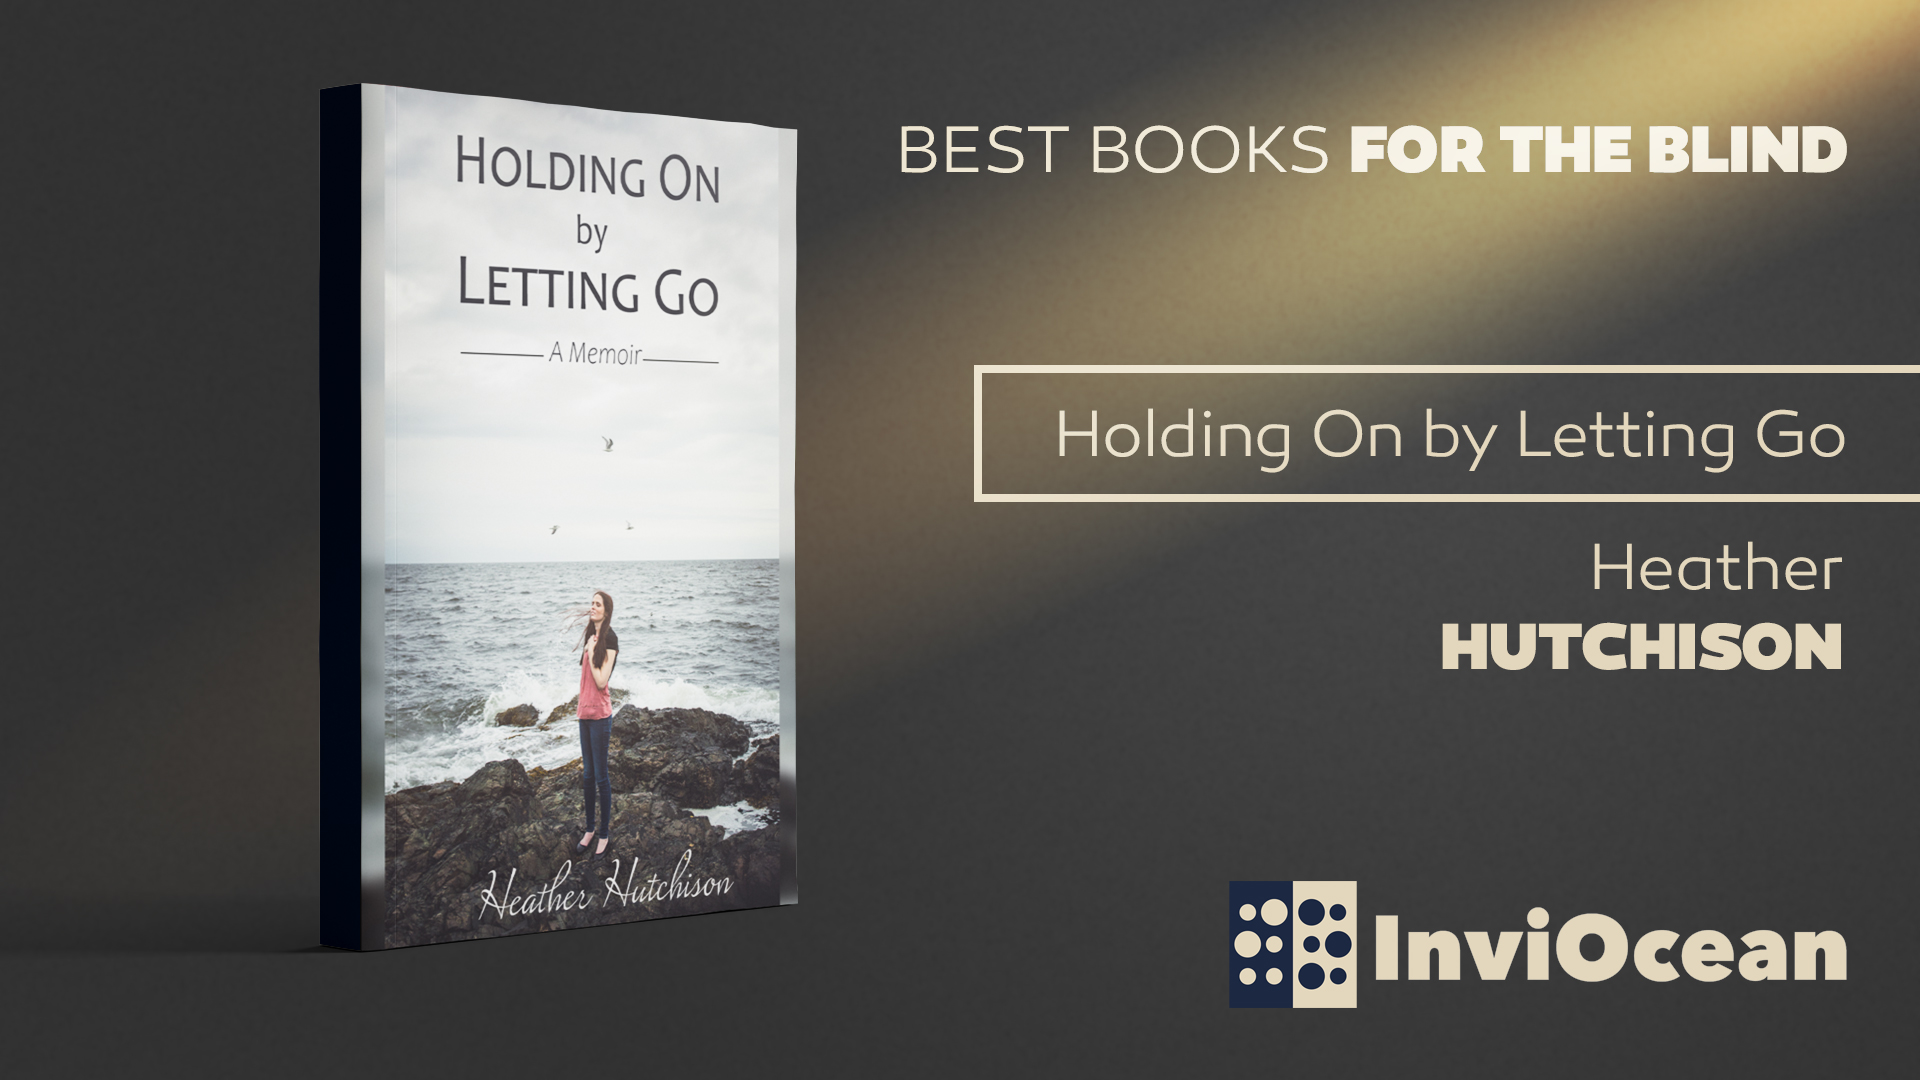 Holding On by Letting Go by Heather Hutchison